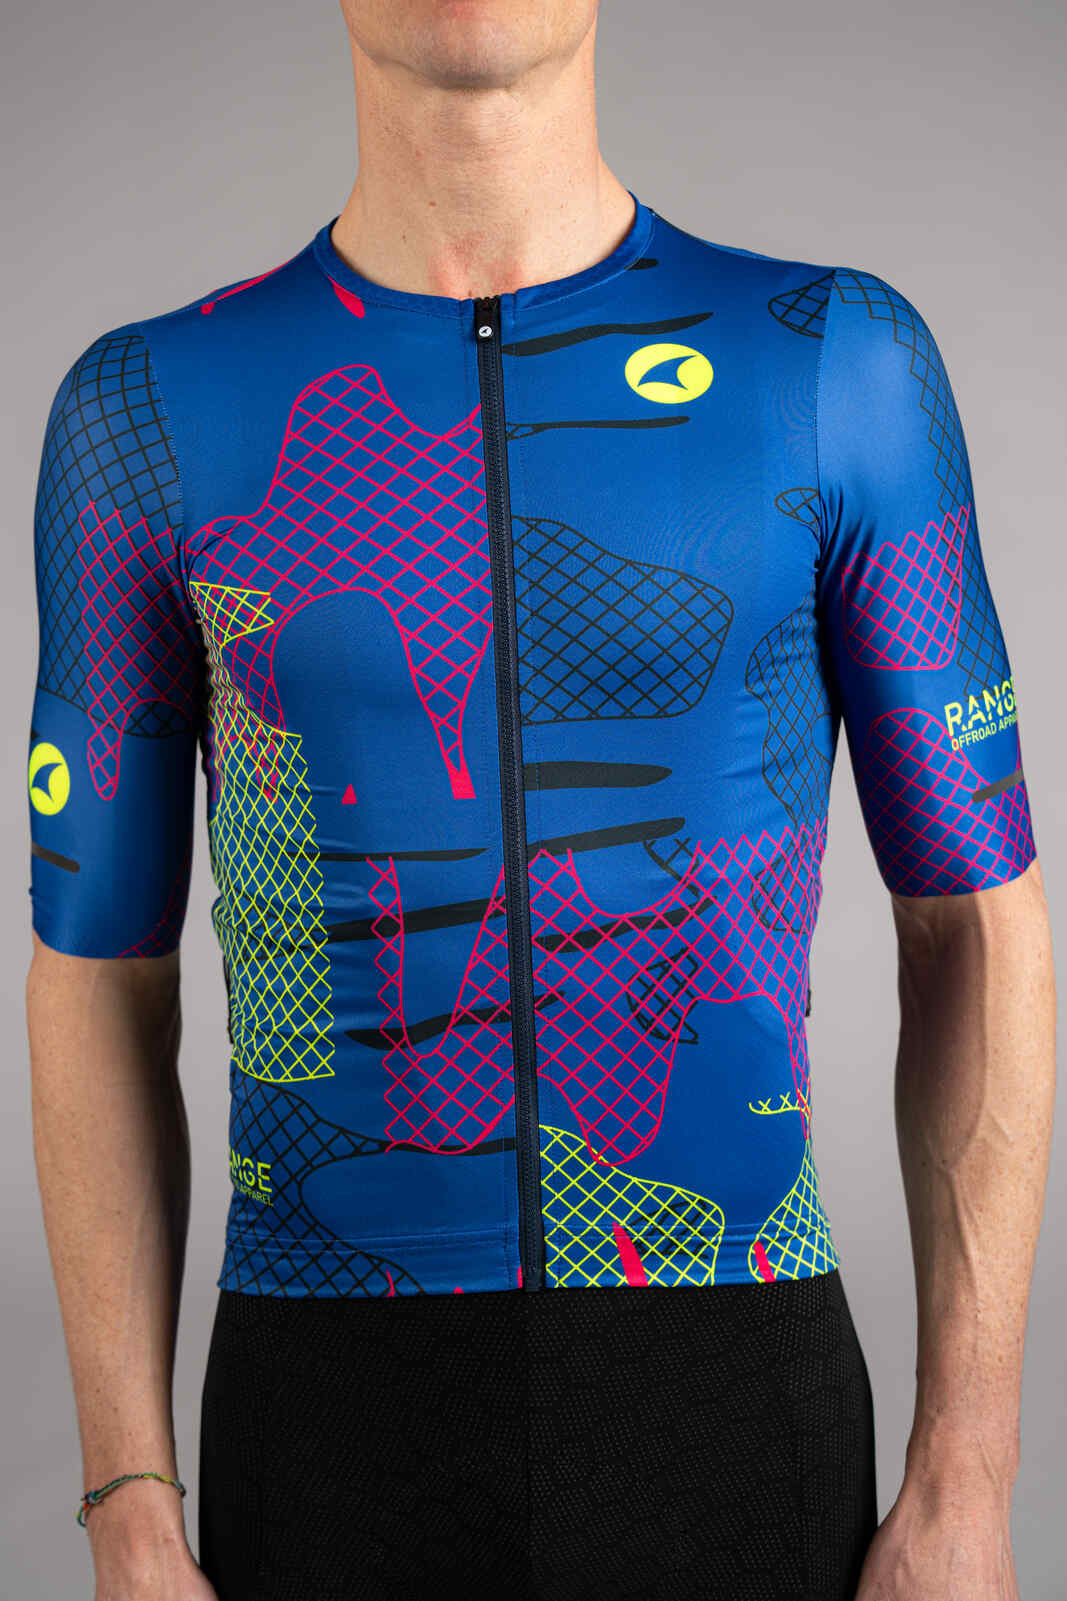 Men's Blue Gravel Cycling Jersey - Front Close-Up